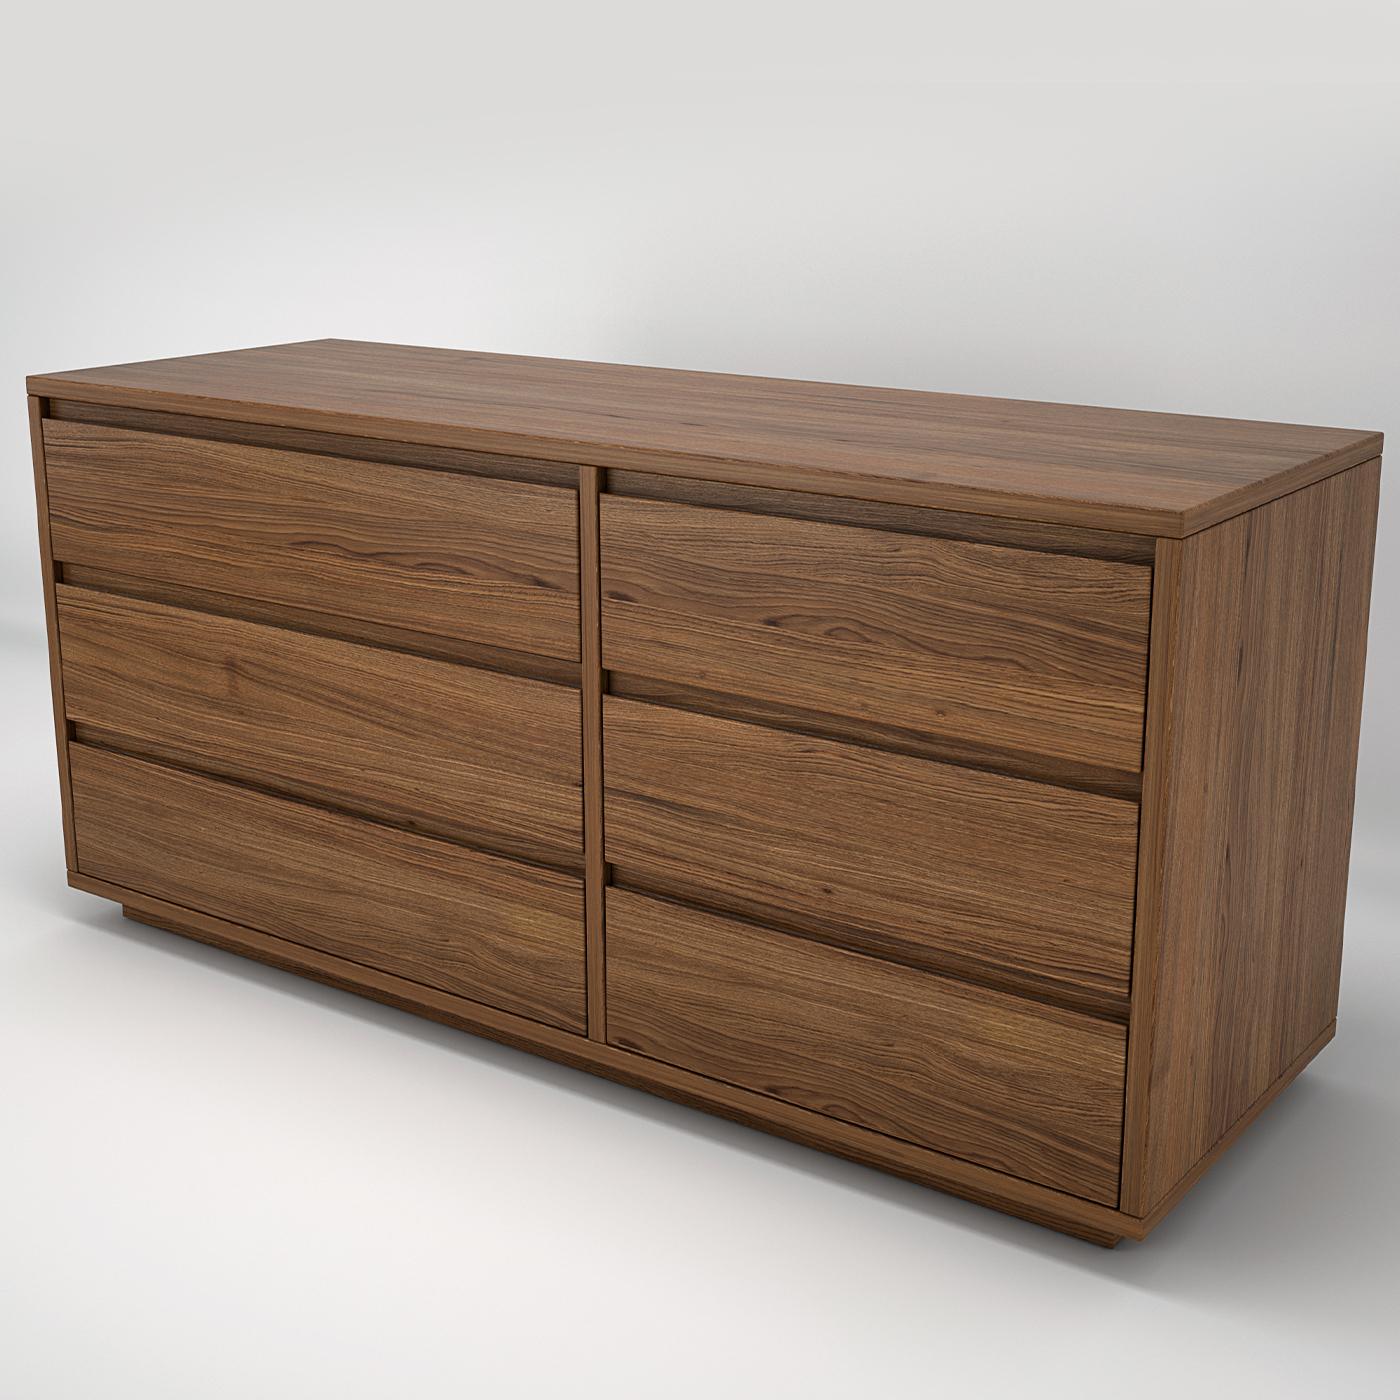 Rich in storage potential, the versatile Linnea Dresser delivers minimalist elegance with its Scandinavian-style design handcrafted entirely of solid oak wood. The deliberate lack of ornate details lets the artisans' mastery take center stage. The